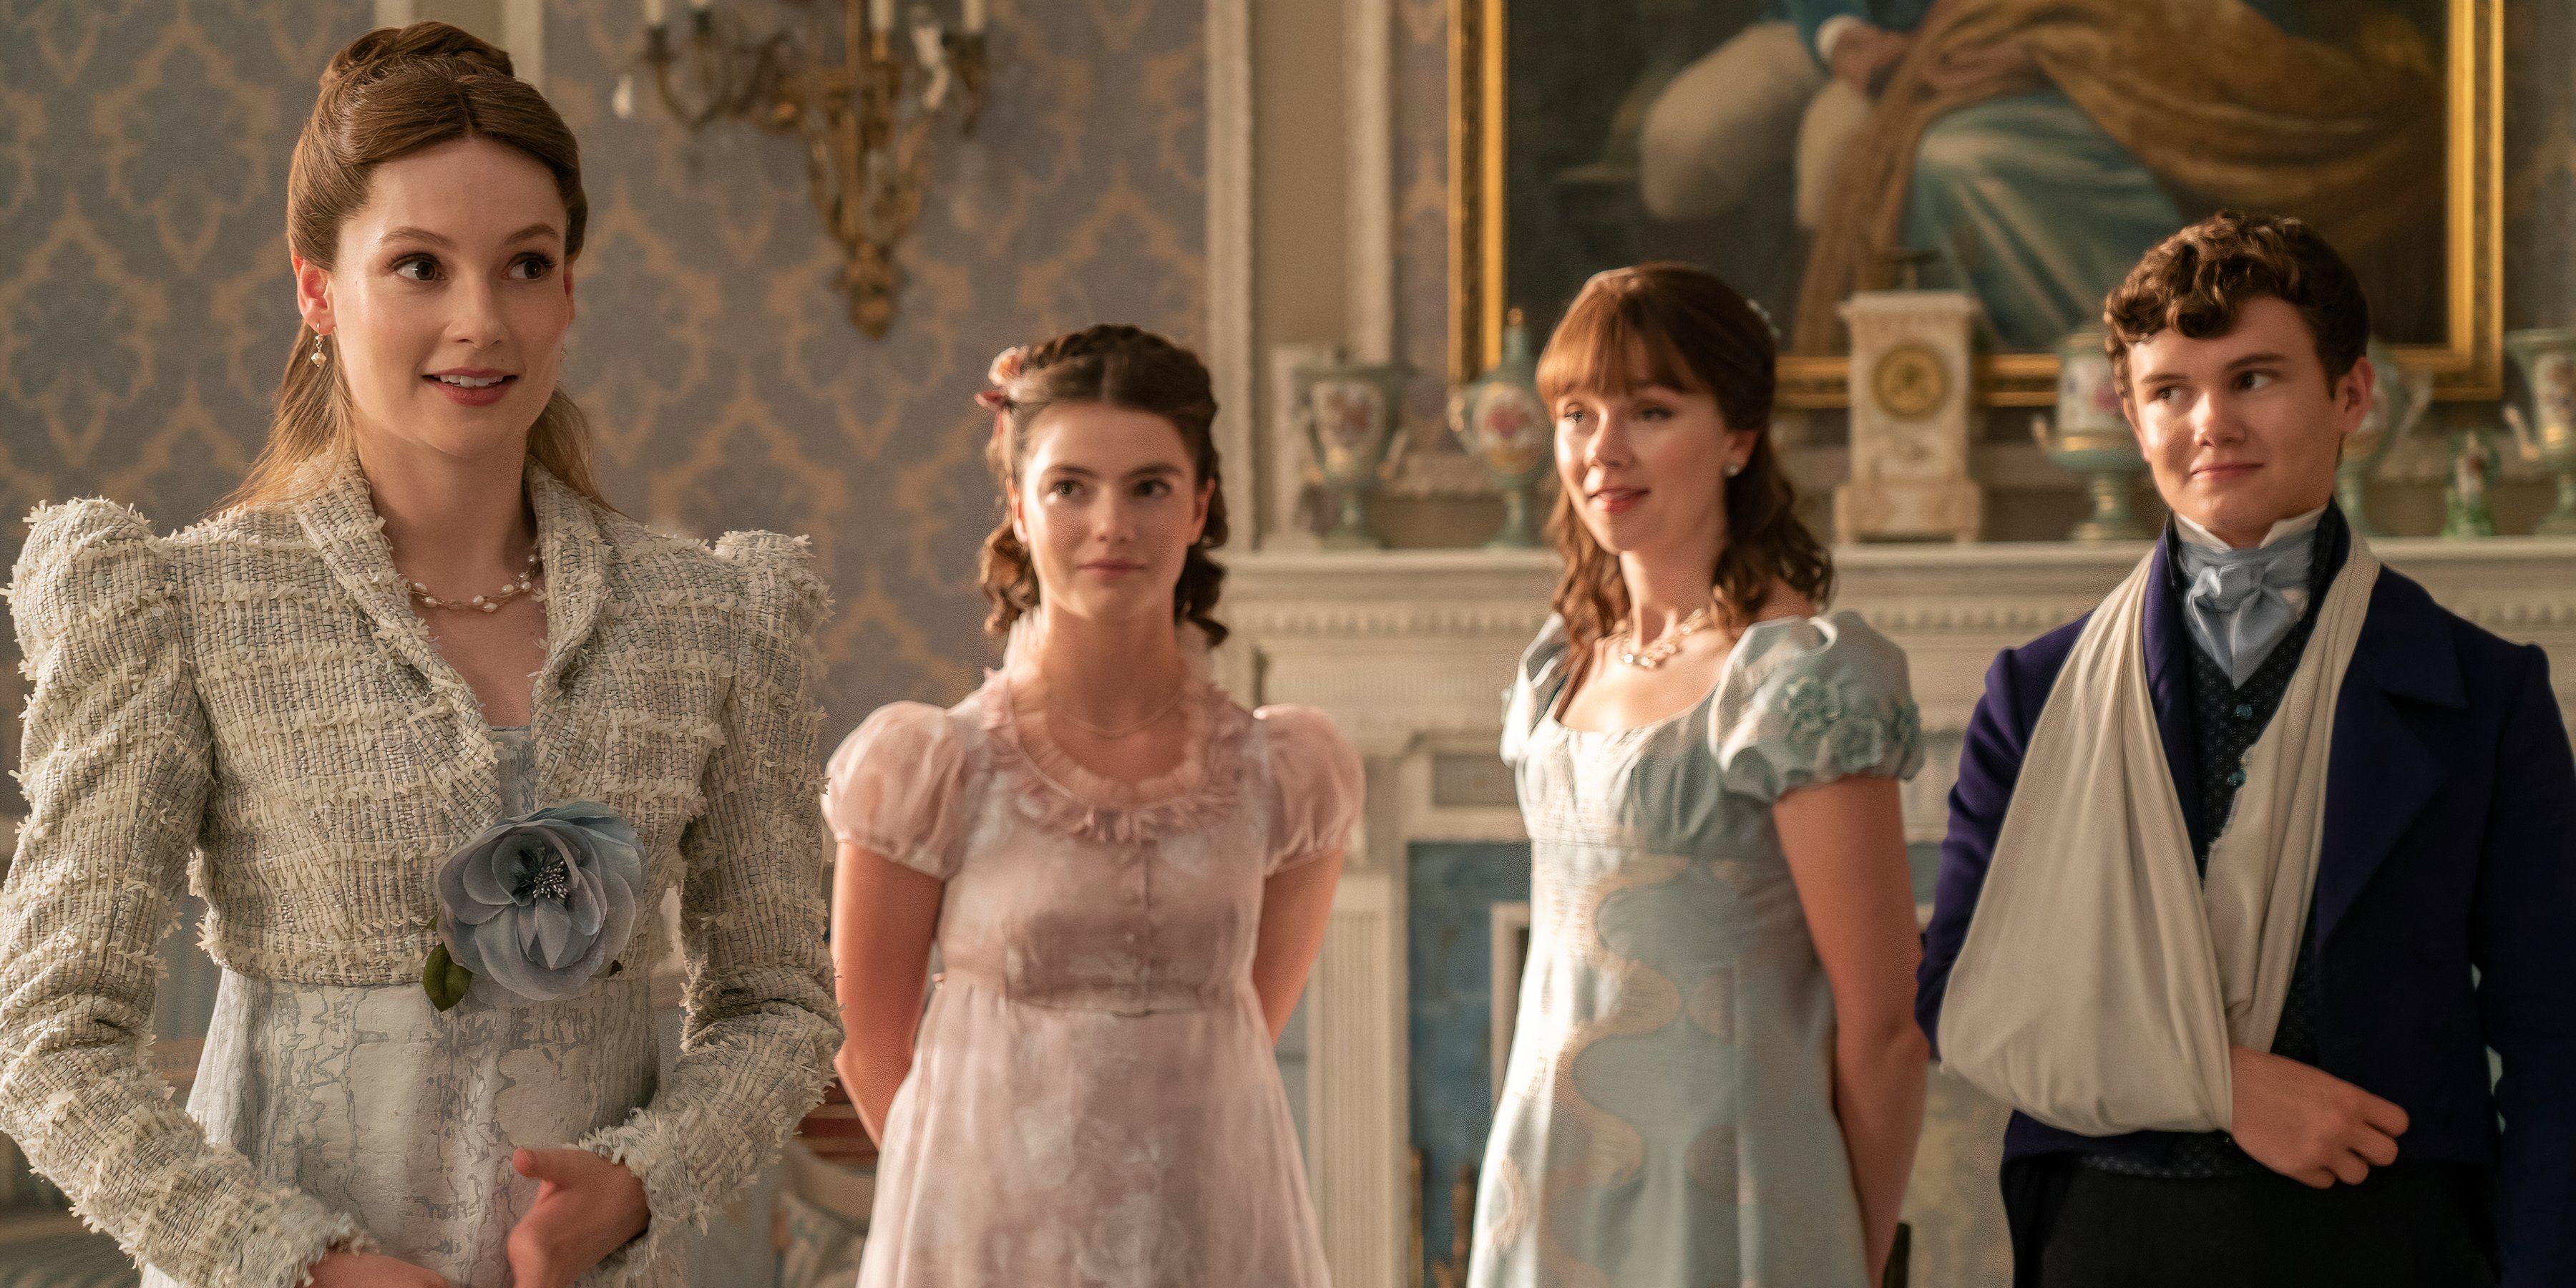 Francesca smiles with Hyacinth, Eloise and Gregory behind her in Bridgerton season 3 still